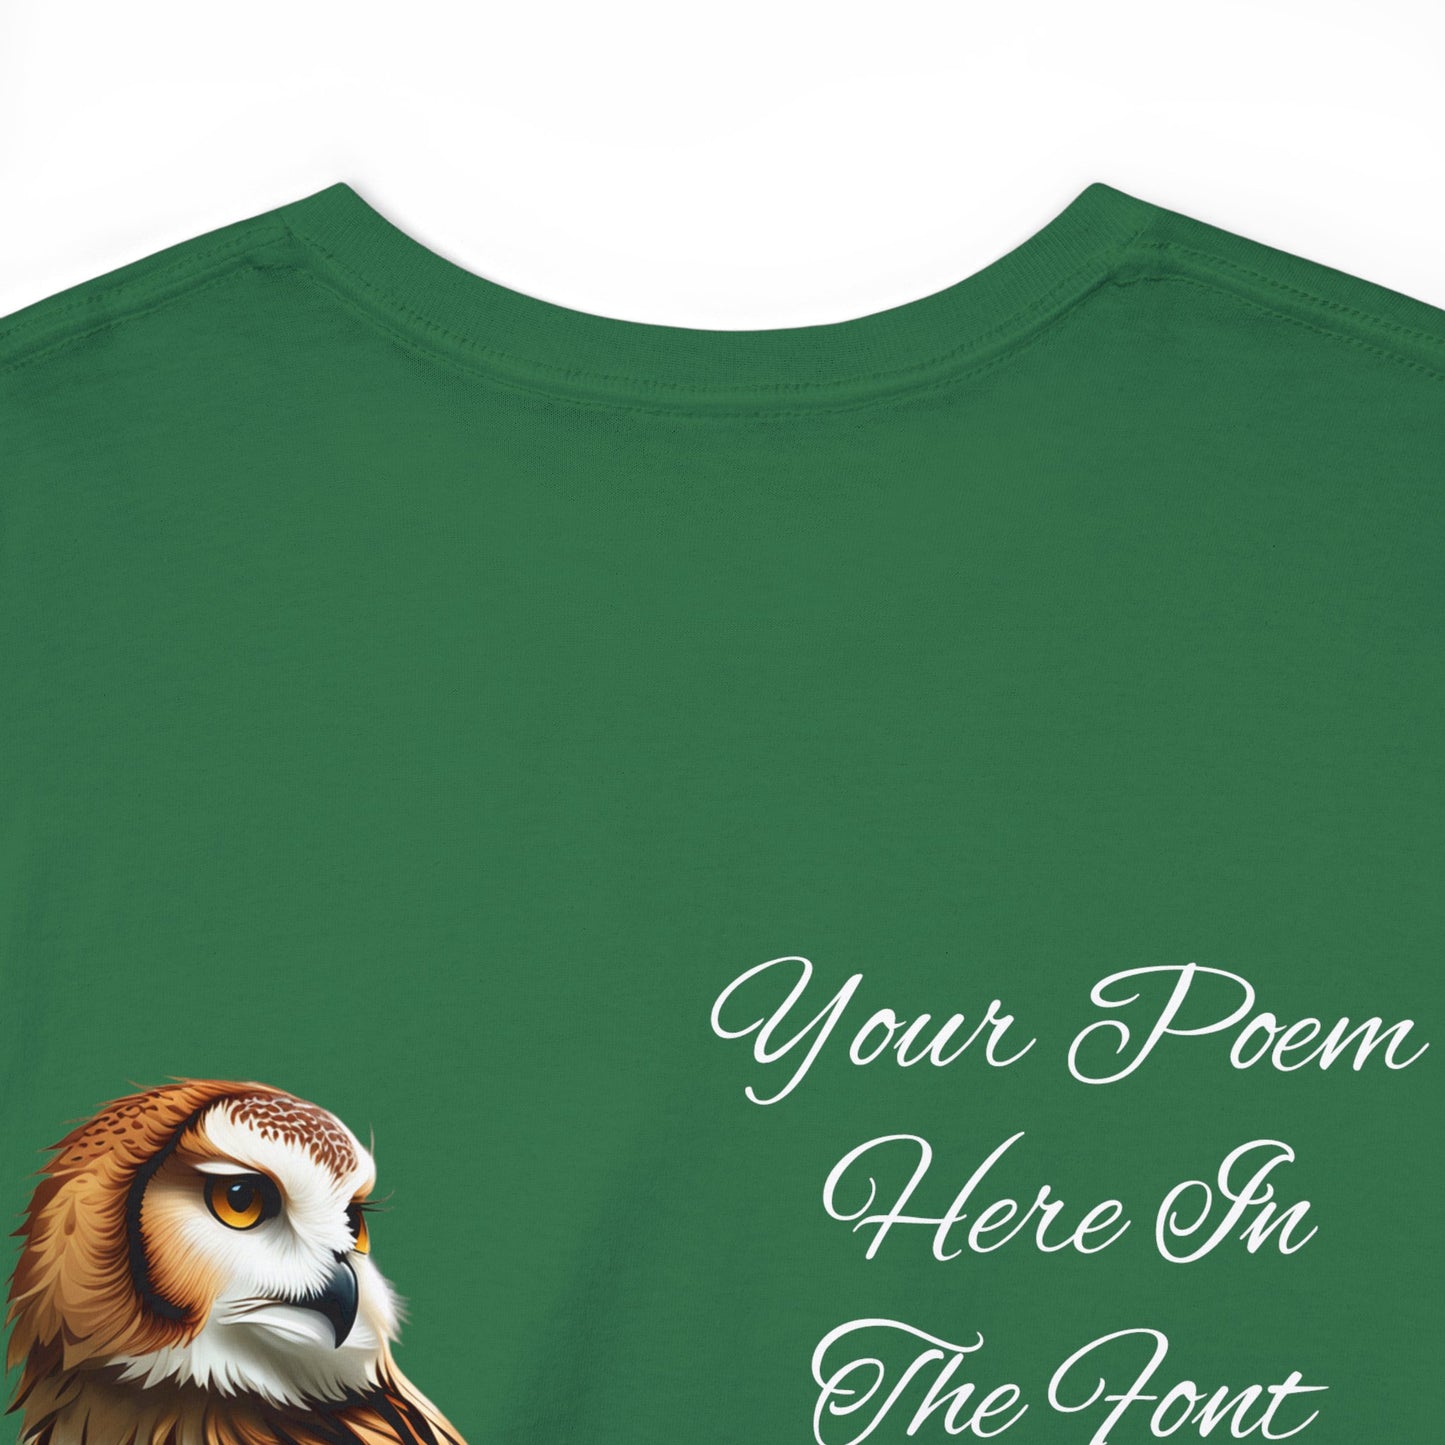 Your Poem On A Tee Shirt With A Owl